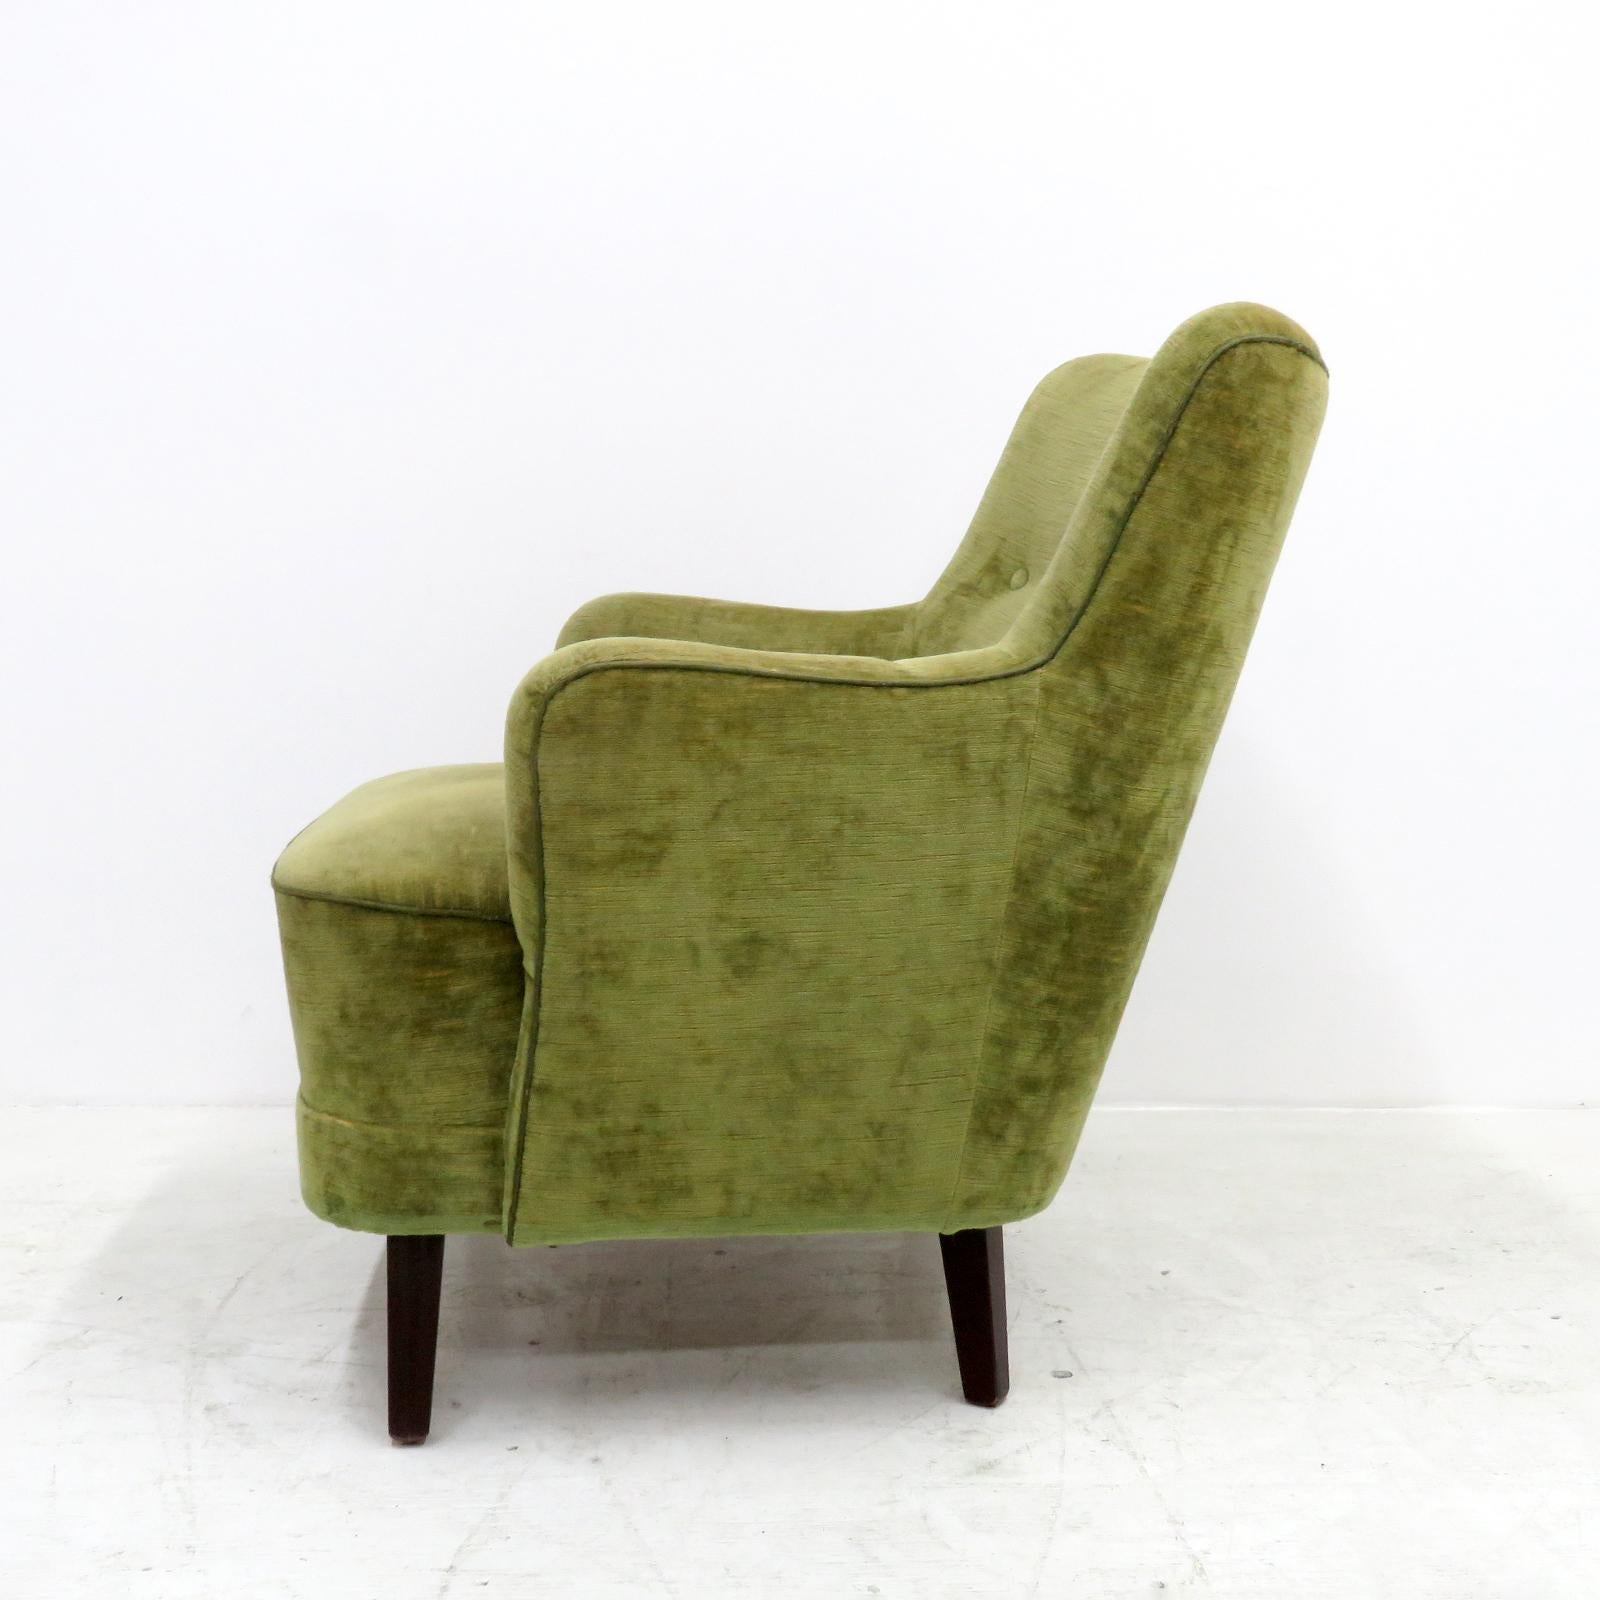 Mid-20th Century Danish Modern Club Chairs, 1940 For Sale